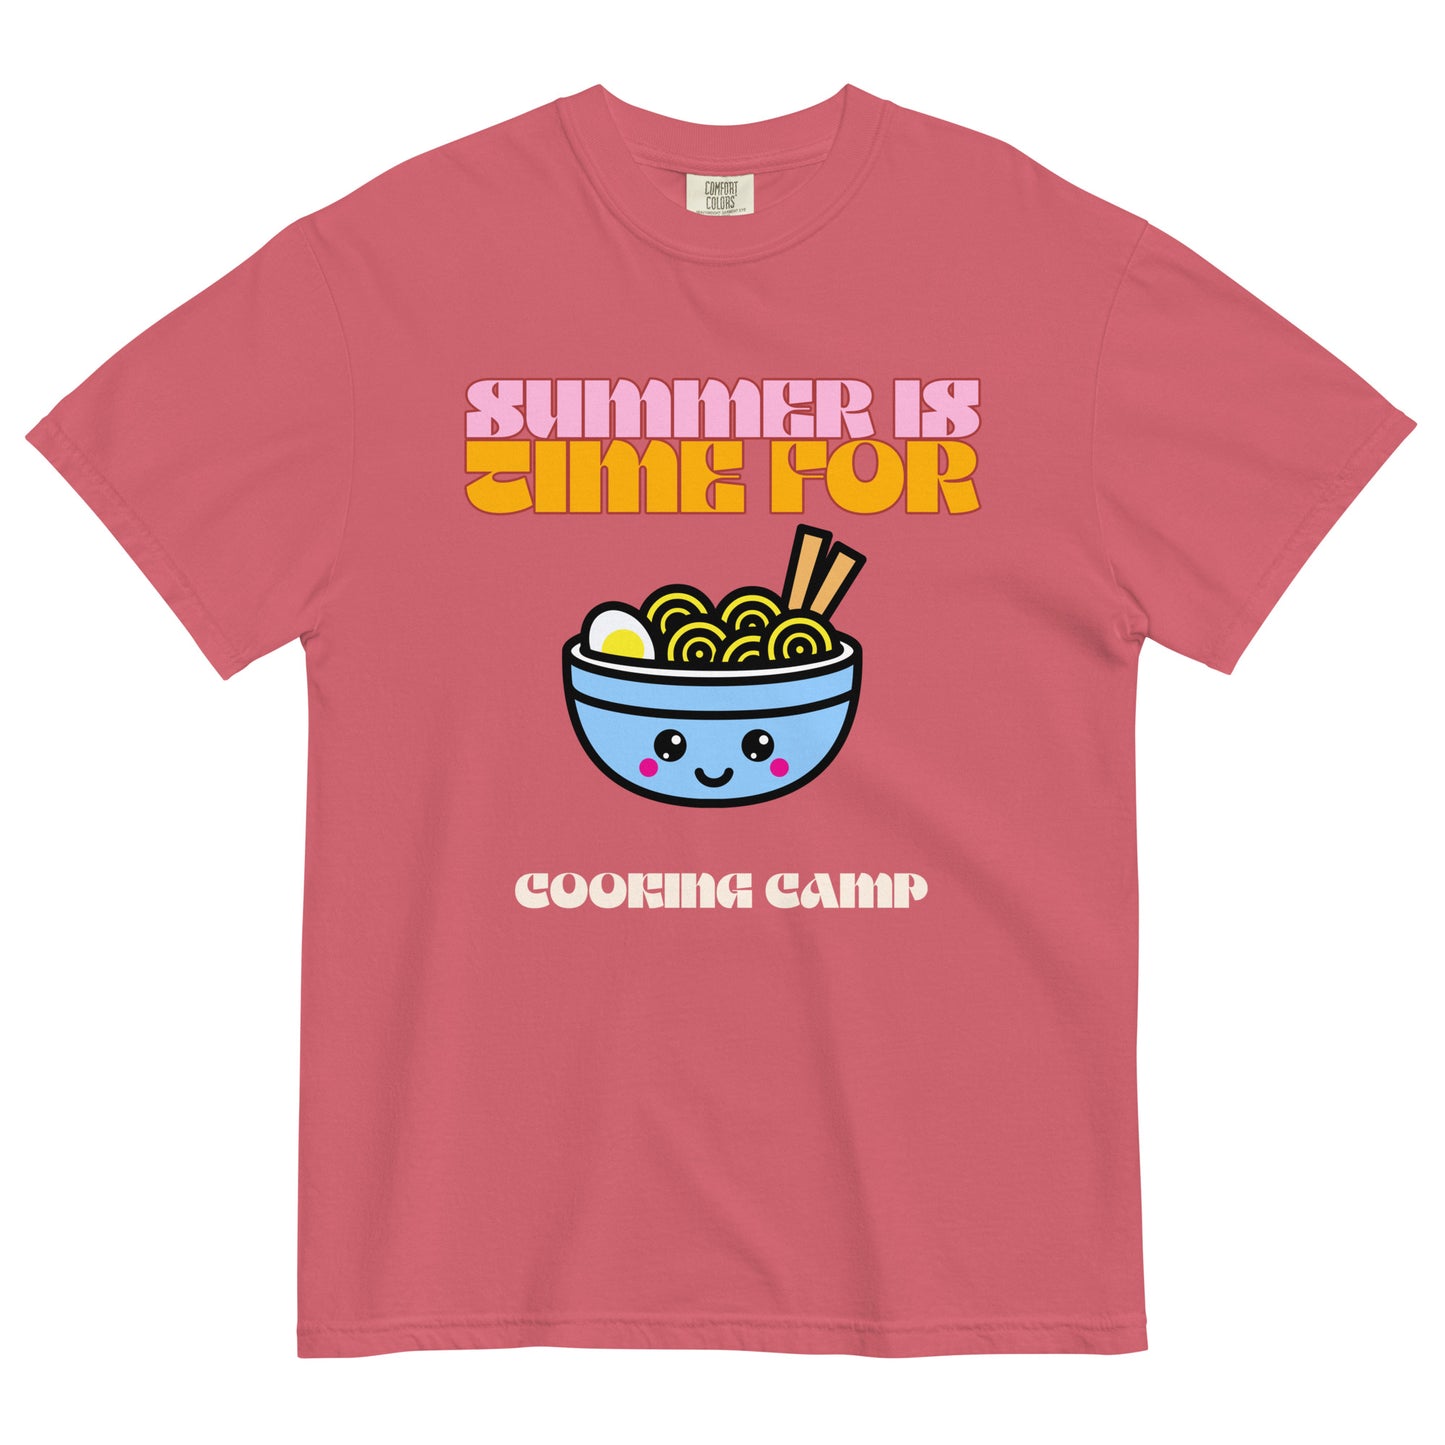 Level Up Your Summer: Cooking Camp T-Shirt!